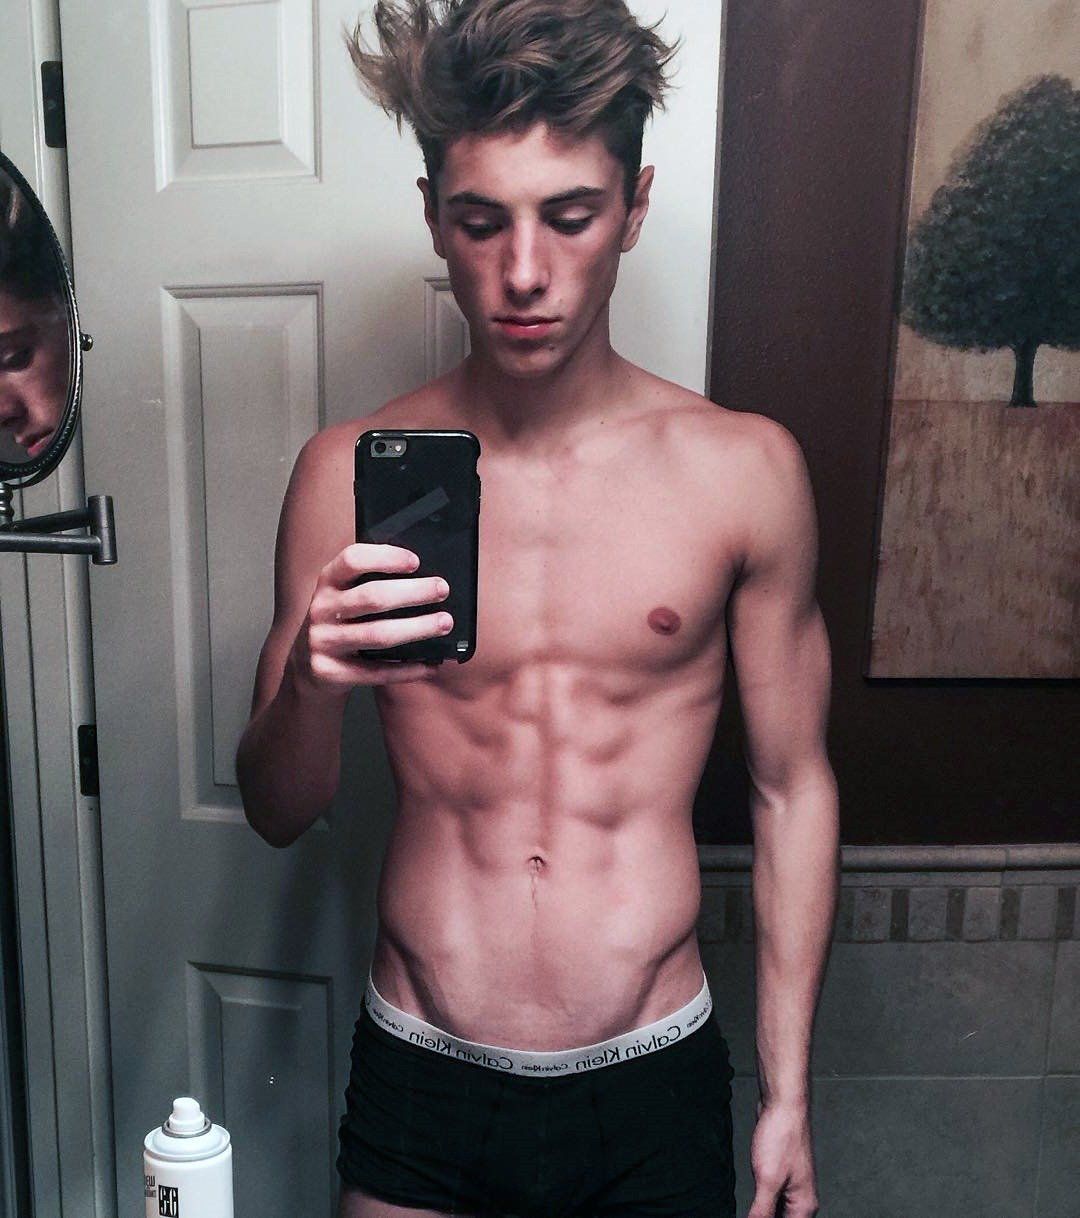 Mr. M. reccomend Hot nude twink phone selfies